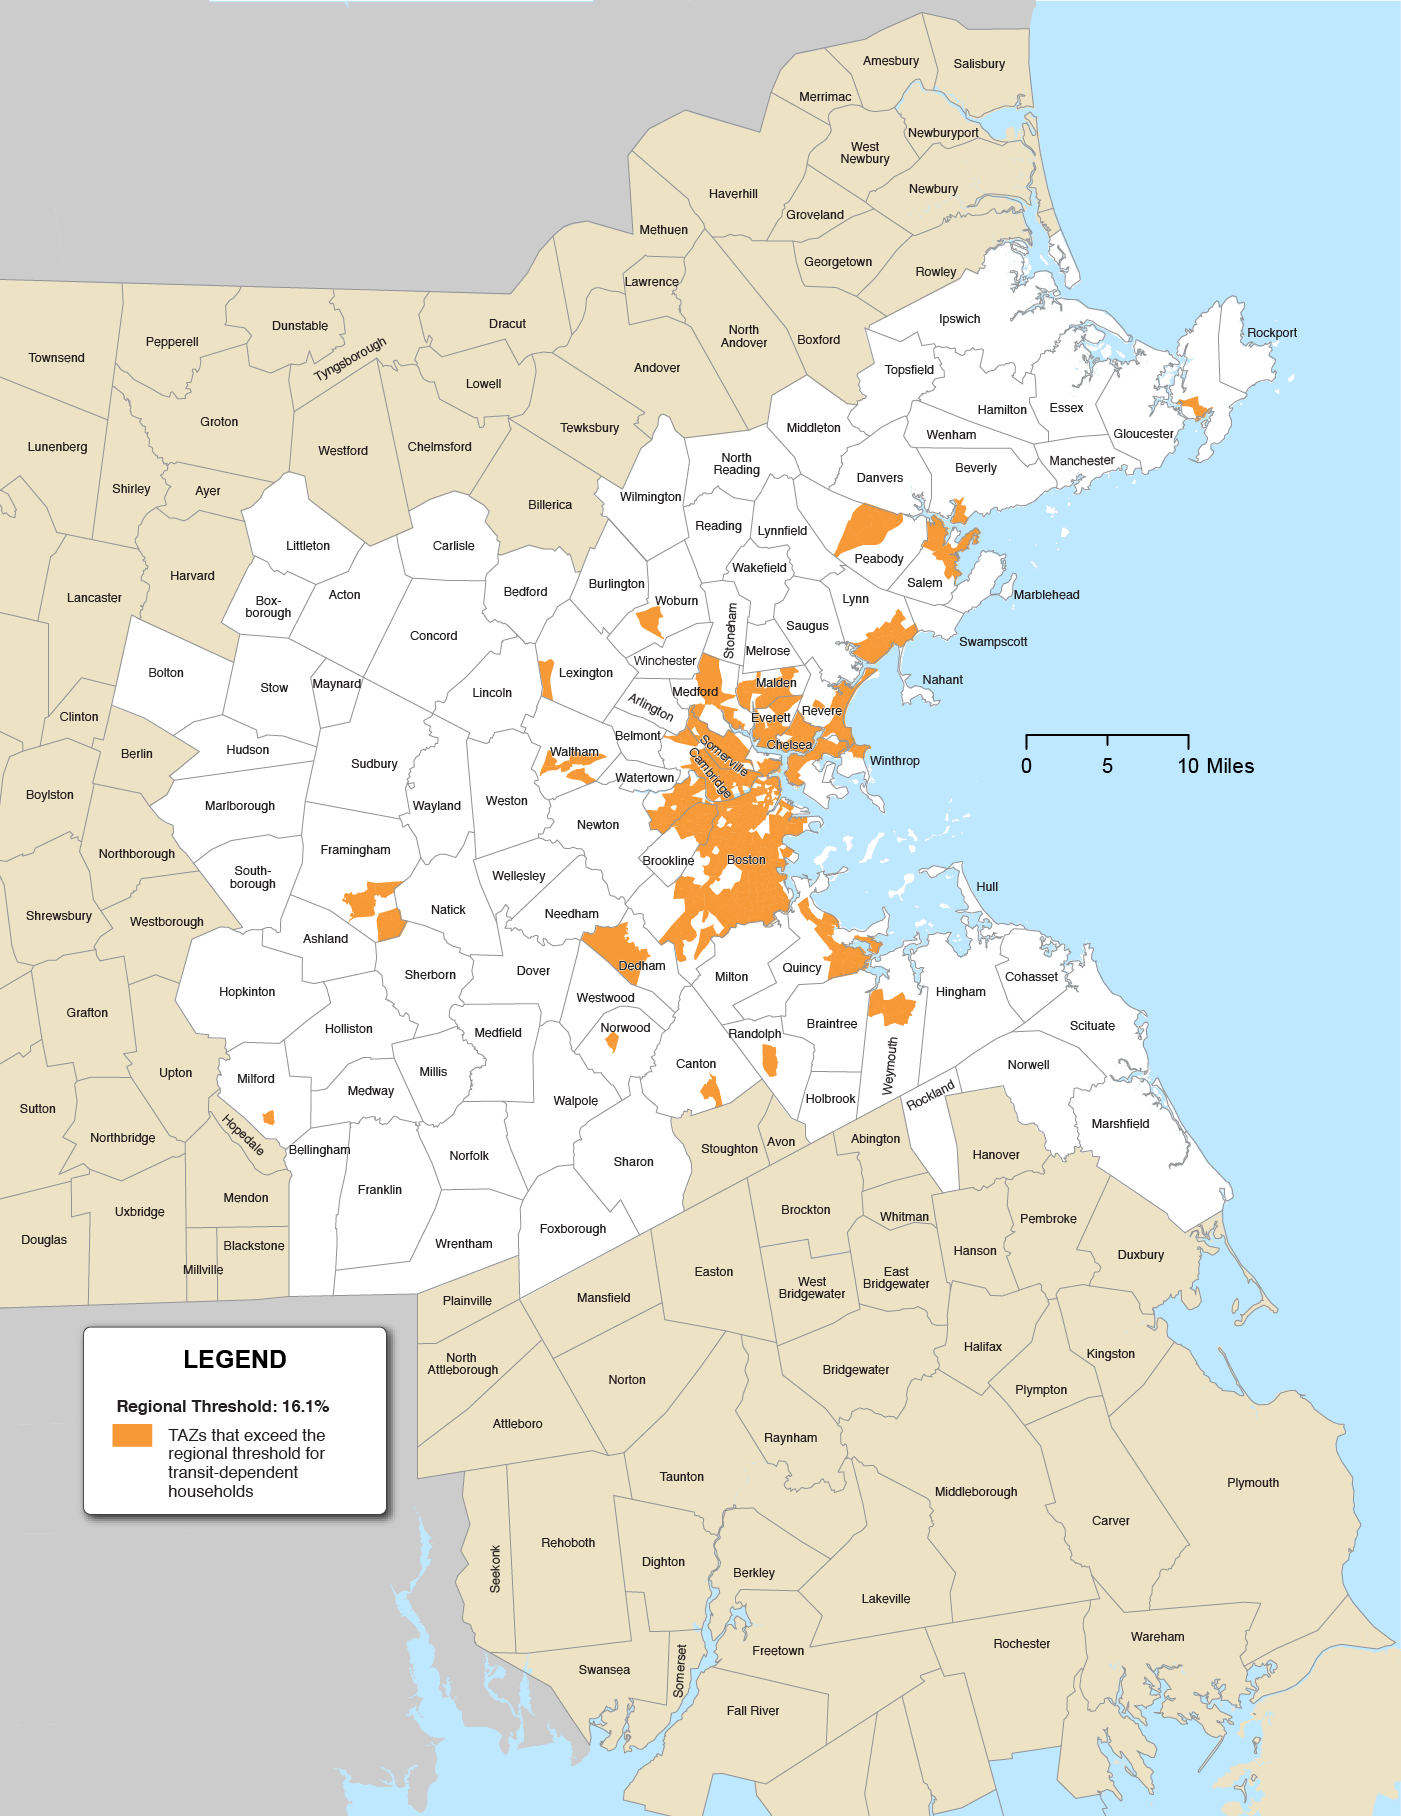 Figure 8-7 is a map of the Boston Region municipalities and the TAZs that exceed the regional threshold for transit-dependent households highlighted in orange. The Regional Threshold is 16.1%.